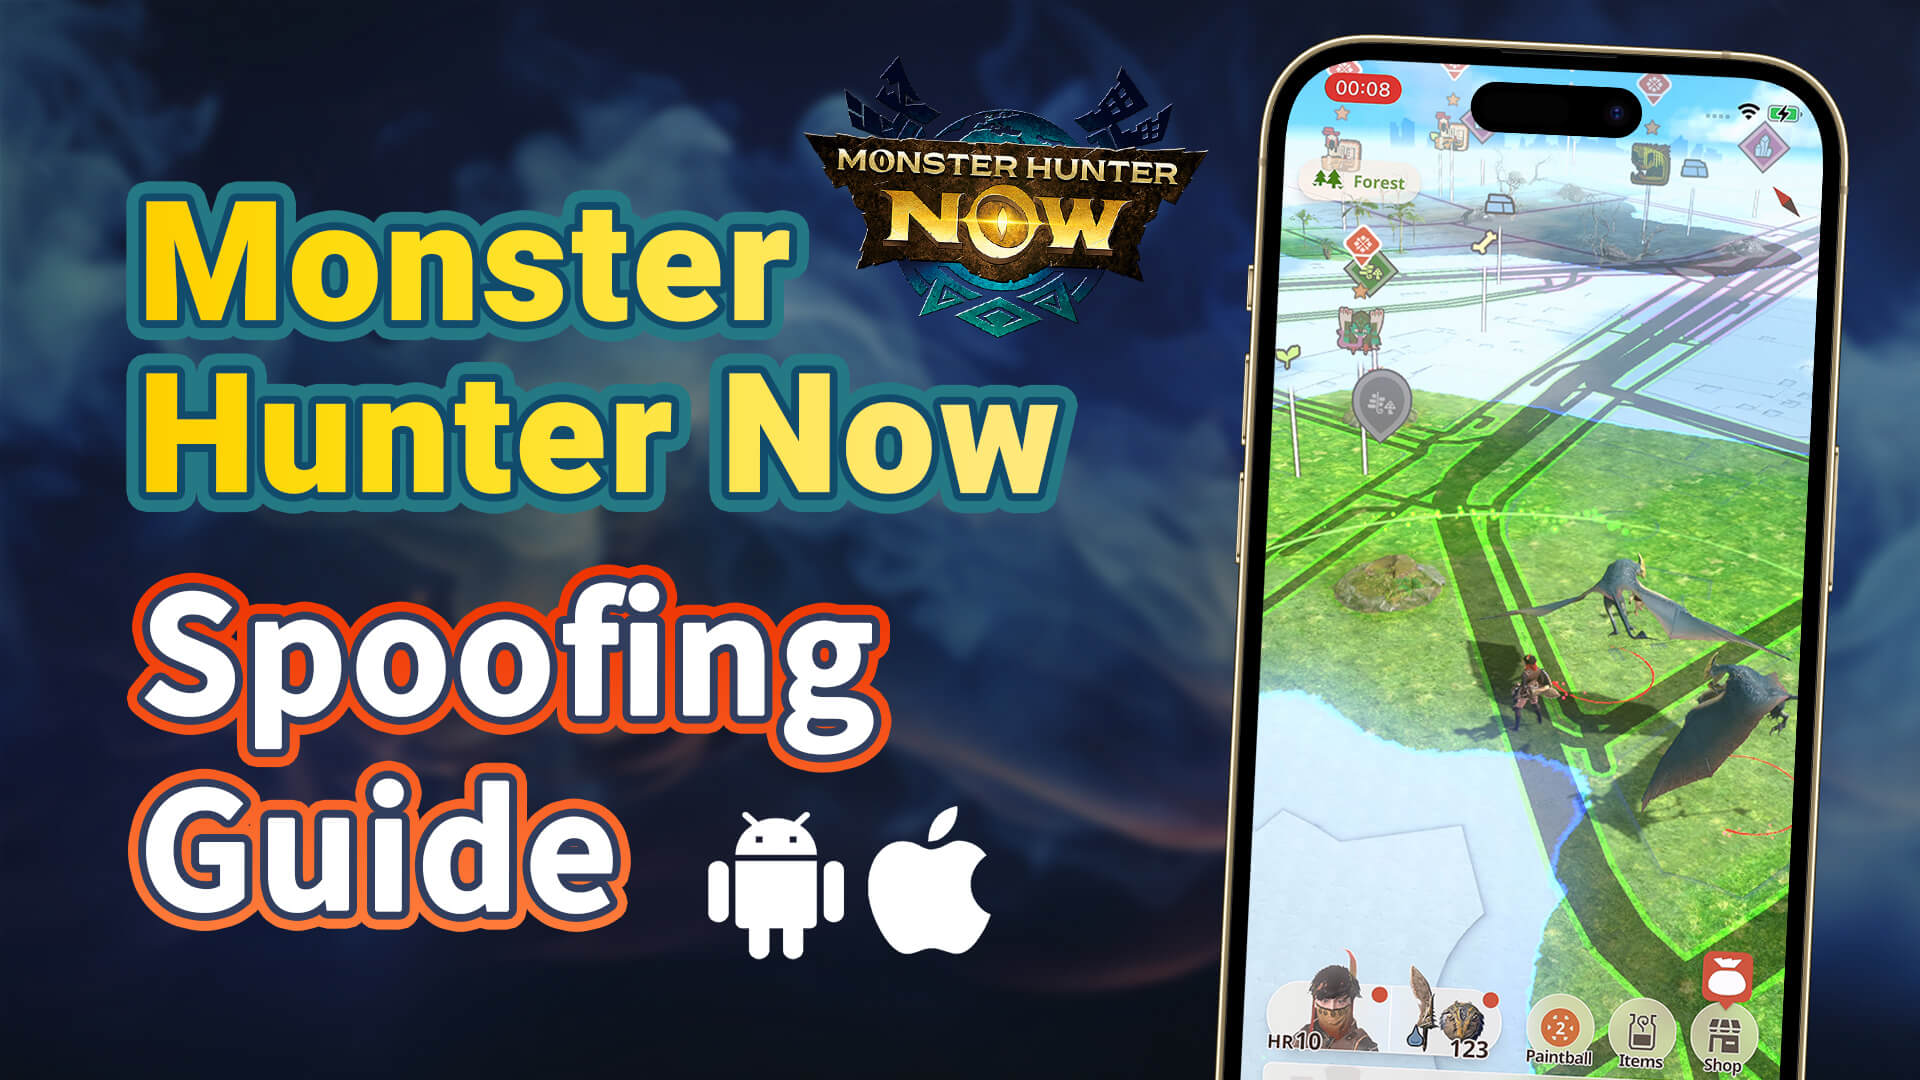 How To Spoof Monster Hunter Now Location for iOS & Android, MH Now Fake GPS,  Joystick